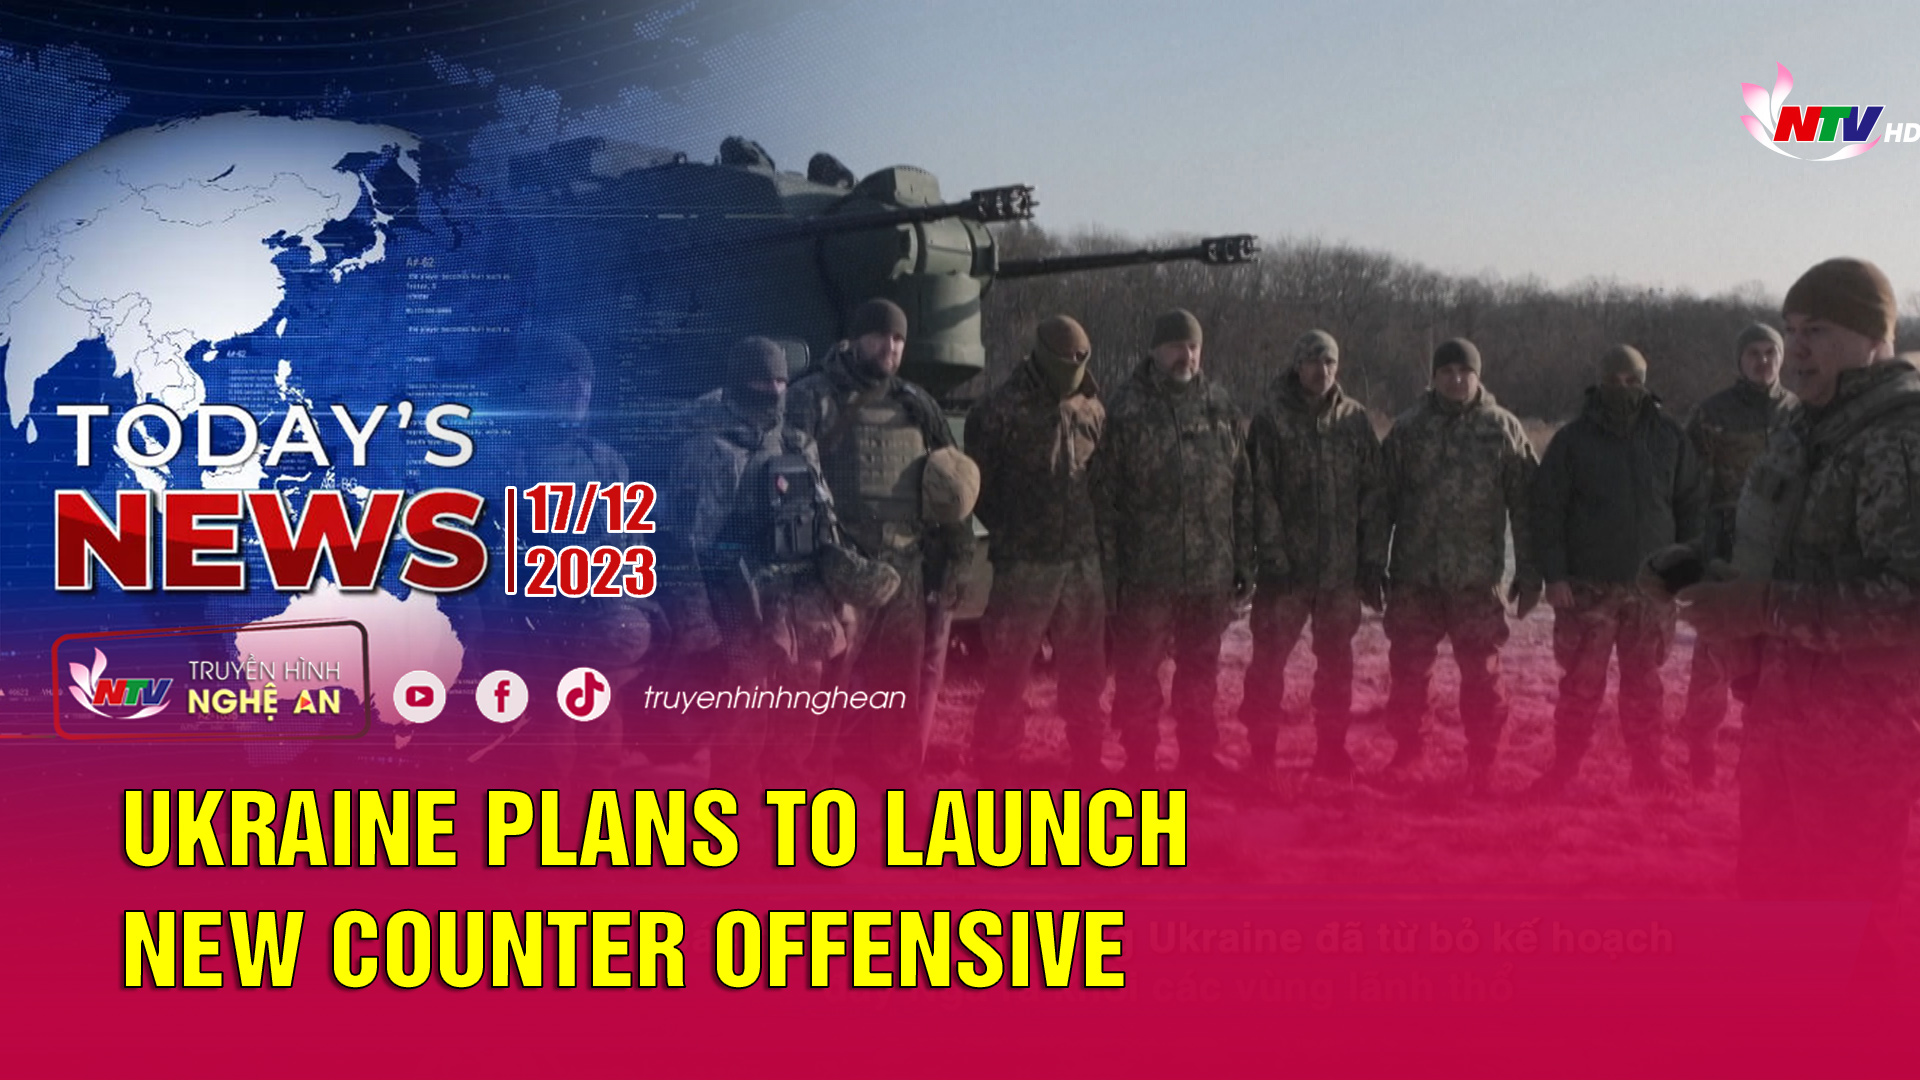 Today's News - 17/12/2023: Ukraine plans to launch new counter offensive